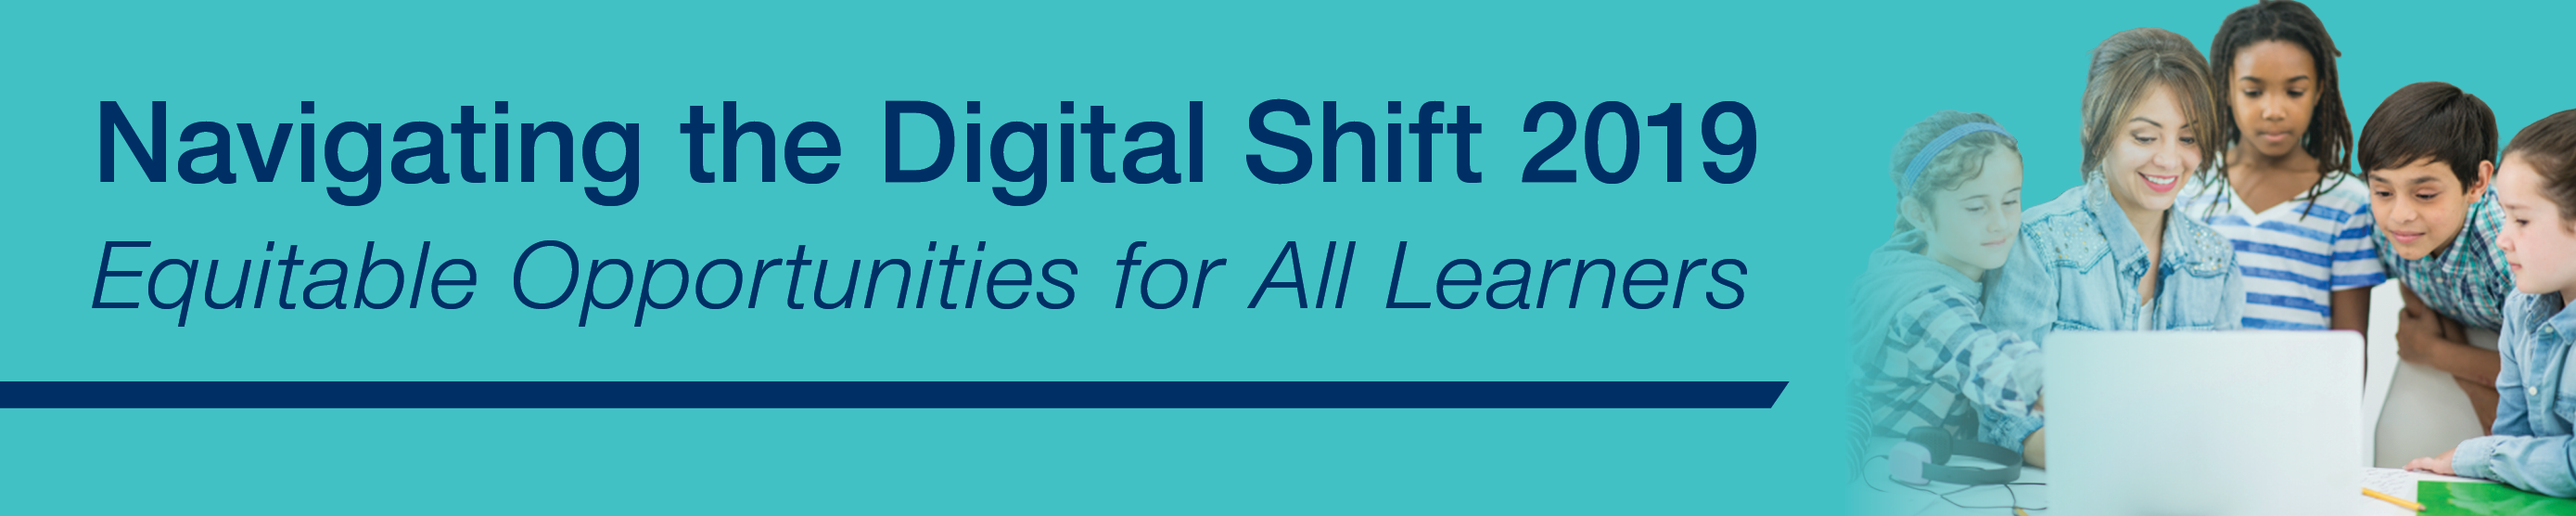 Navigating the Digital Shift: Equitable Opportunities for All Learnerrs